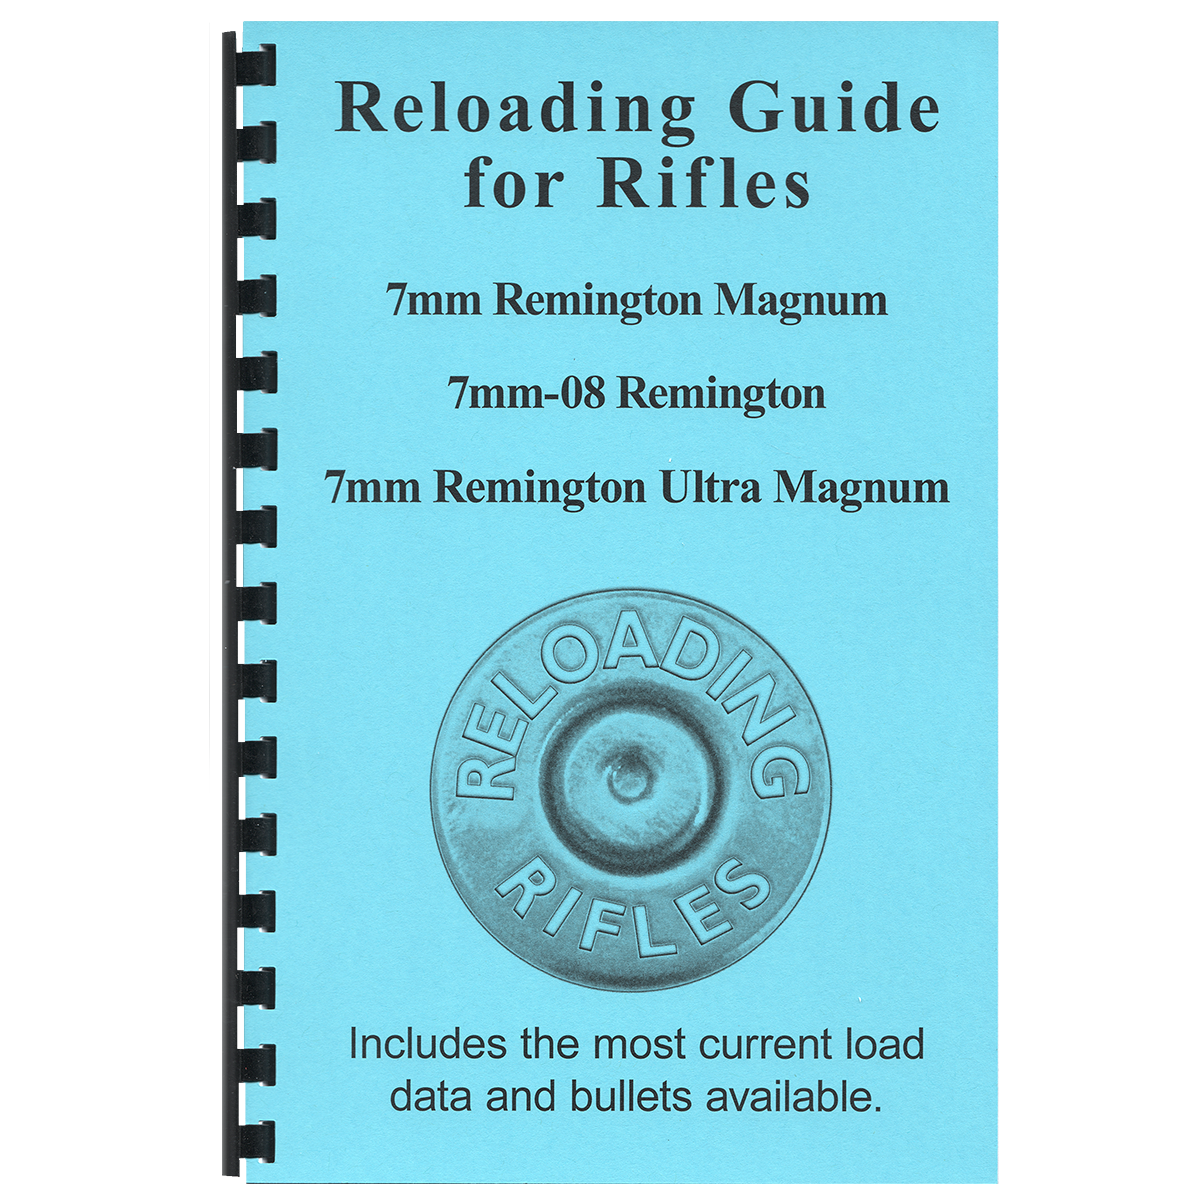 Reloading Guide Rifles - 7mm Magnum, 7mm-08, and 7mm RUM Gun-Guides®